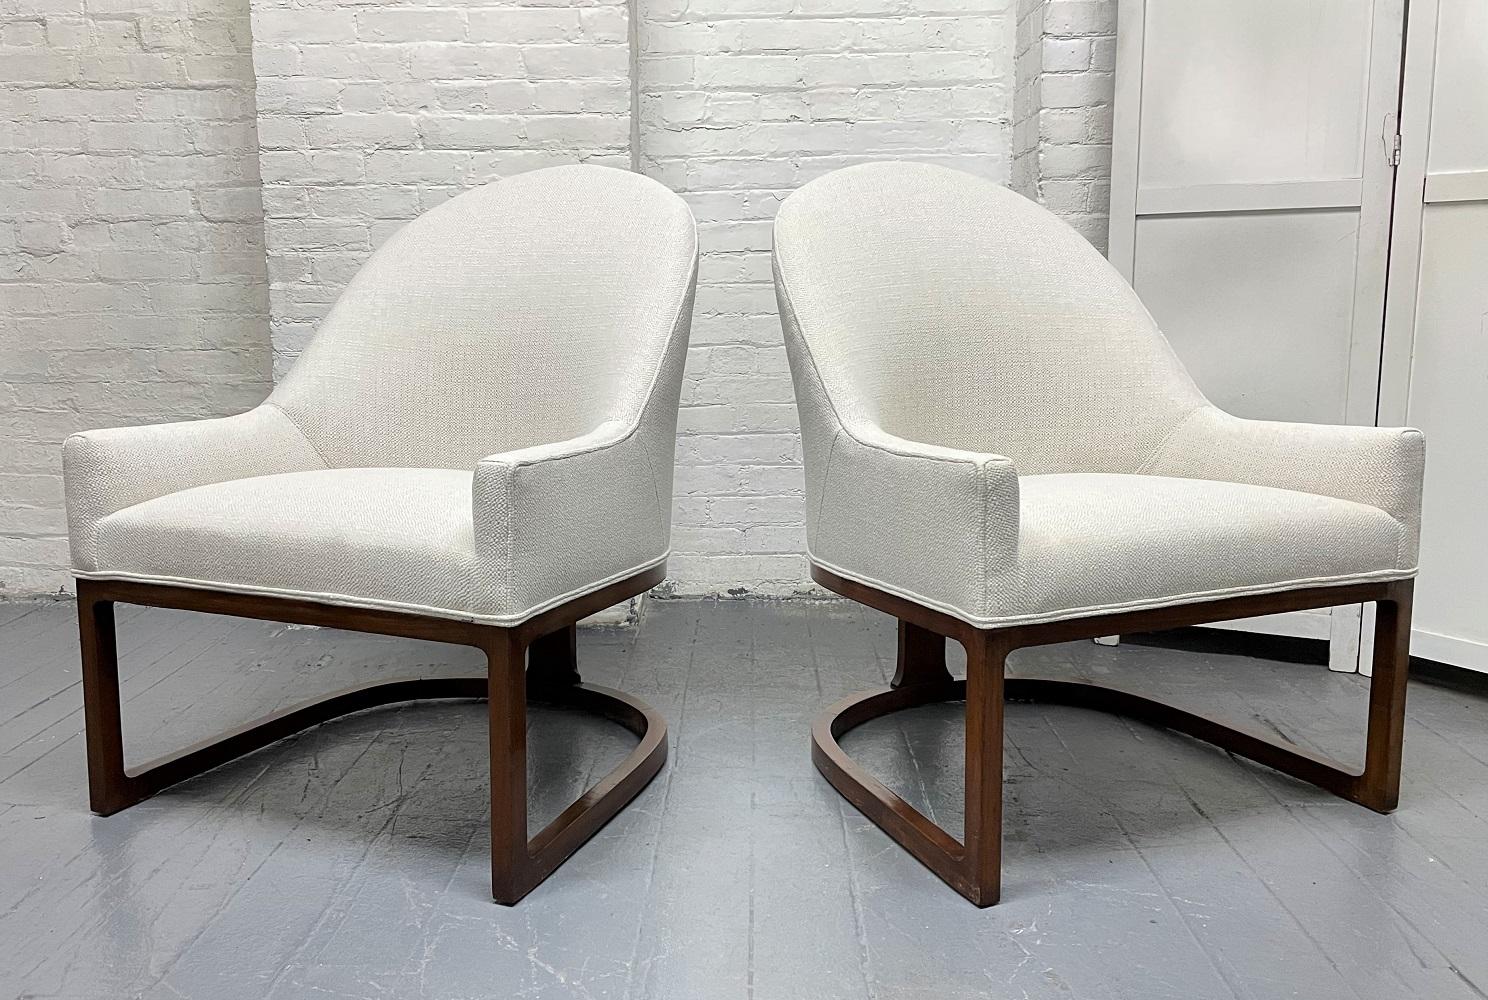 Pair of Mid-Century Modern upholstered side chairs. The chairs have sculptural walnut frames. Also have tufted loose cushions. Chairs are newly upholstered. In the style of Harvey Probber.